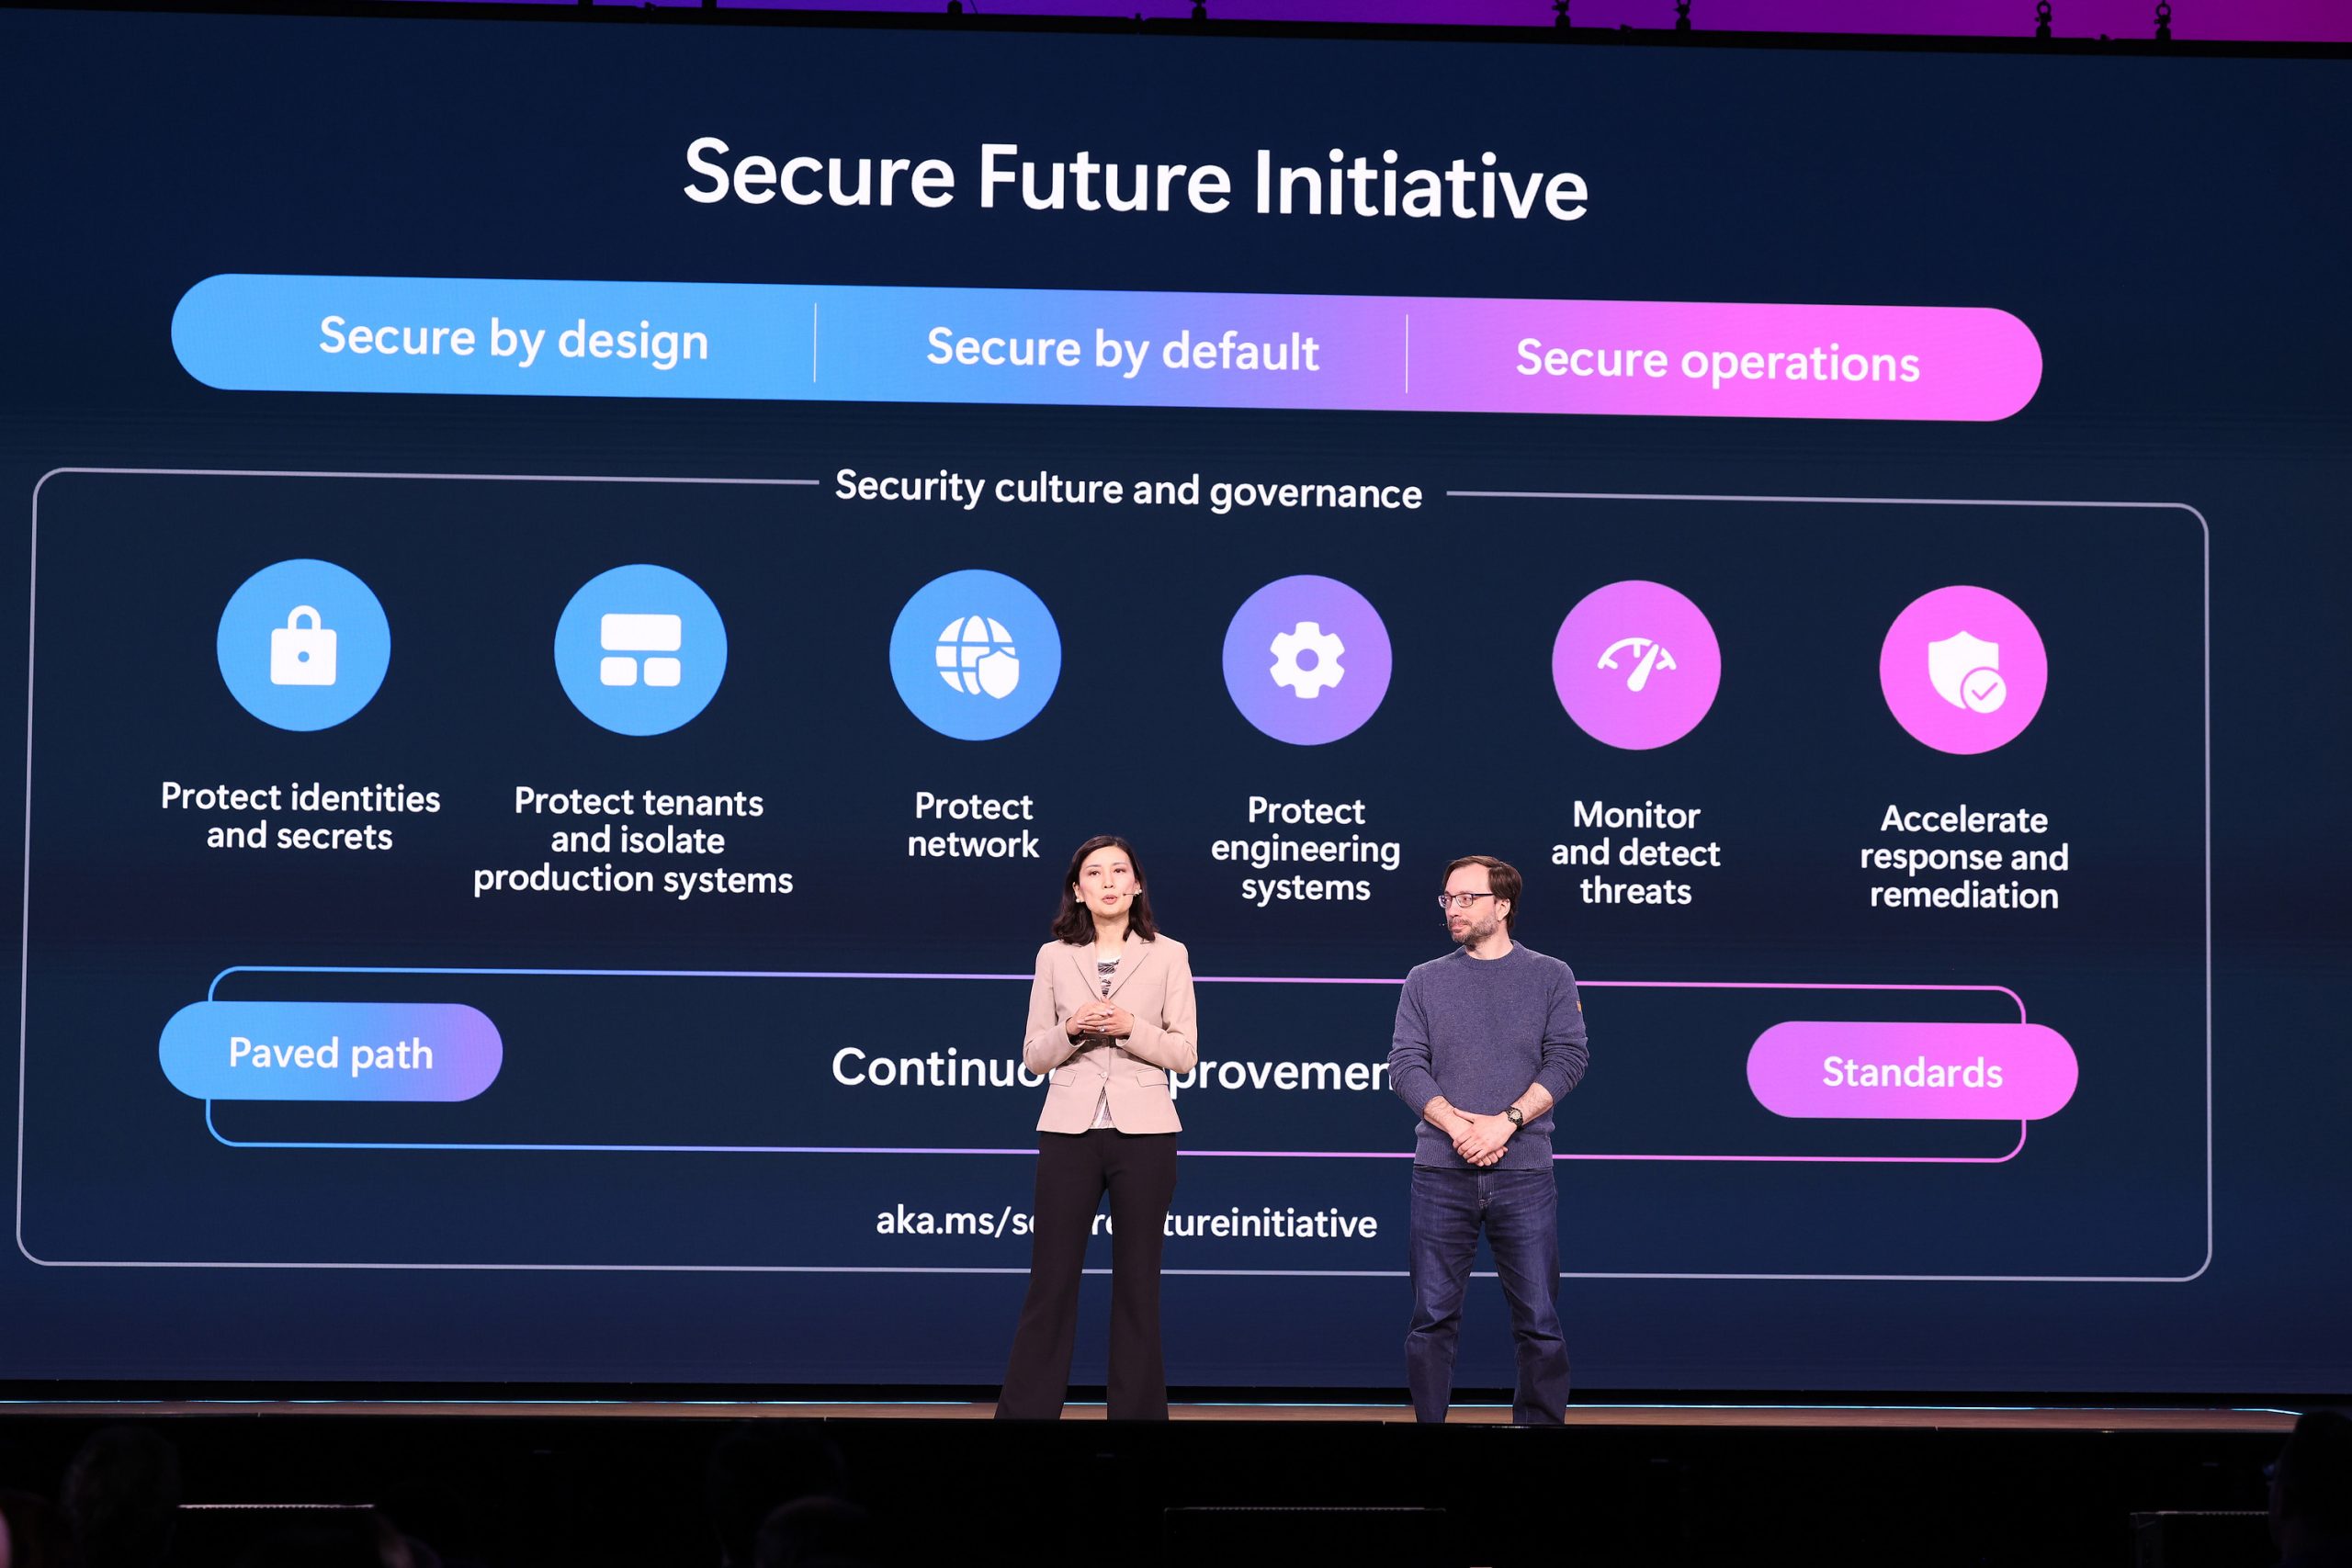 A man and woman standing on stage with text on a screen behind them about Secure Future Initiative